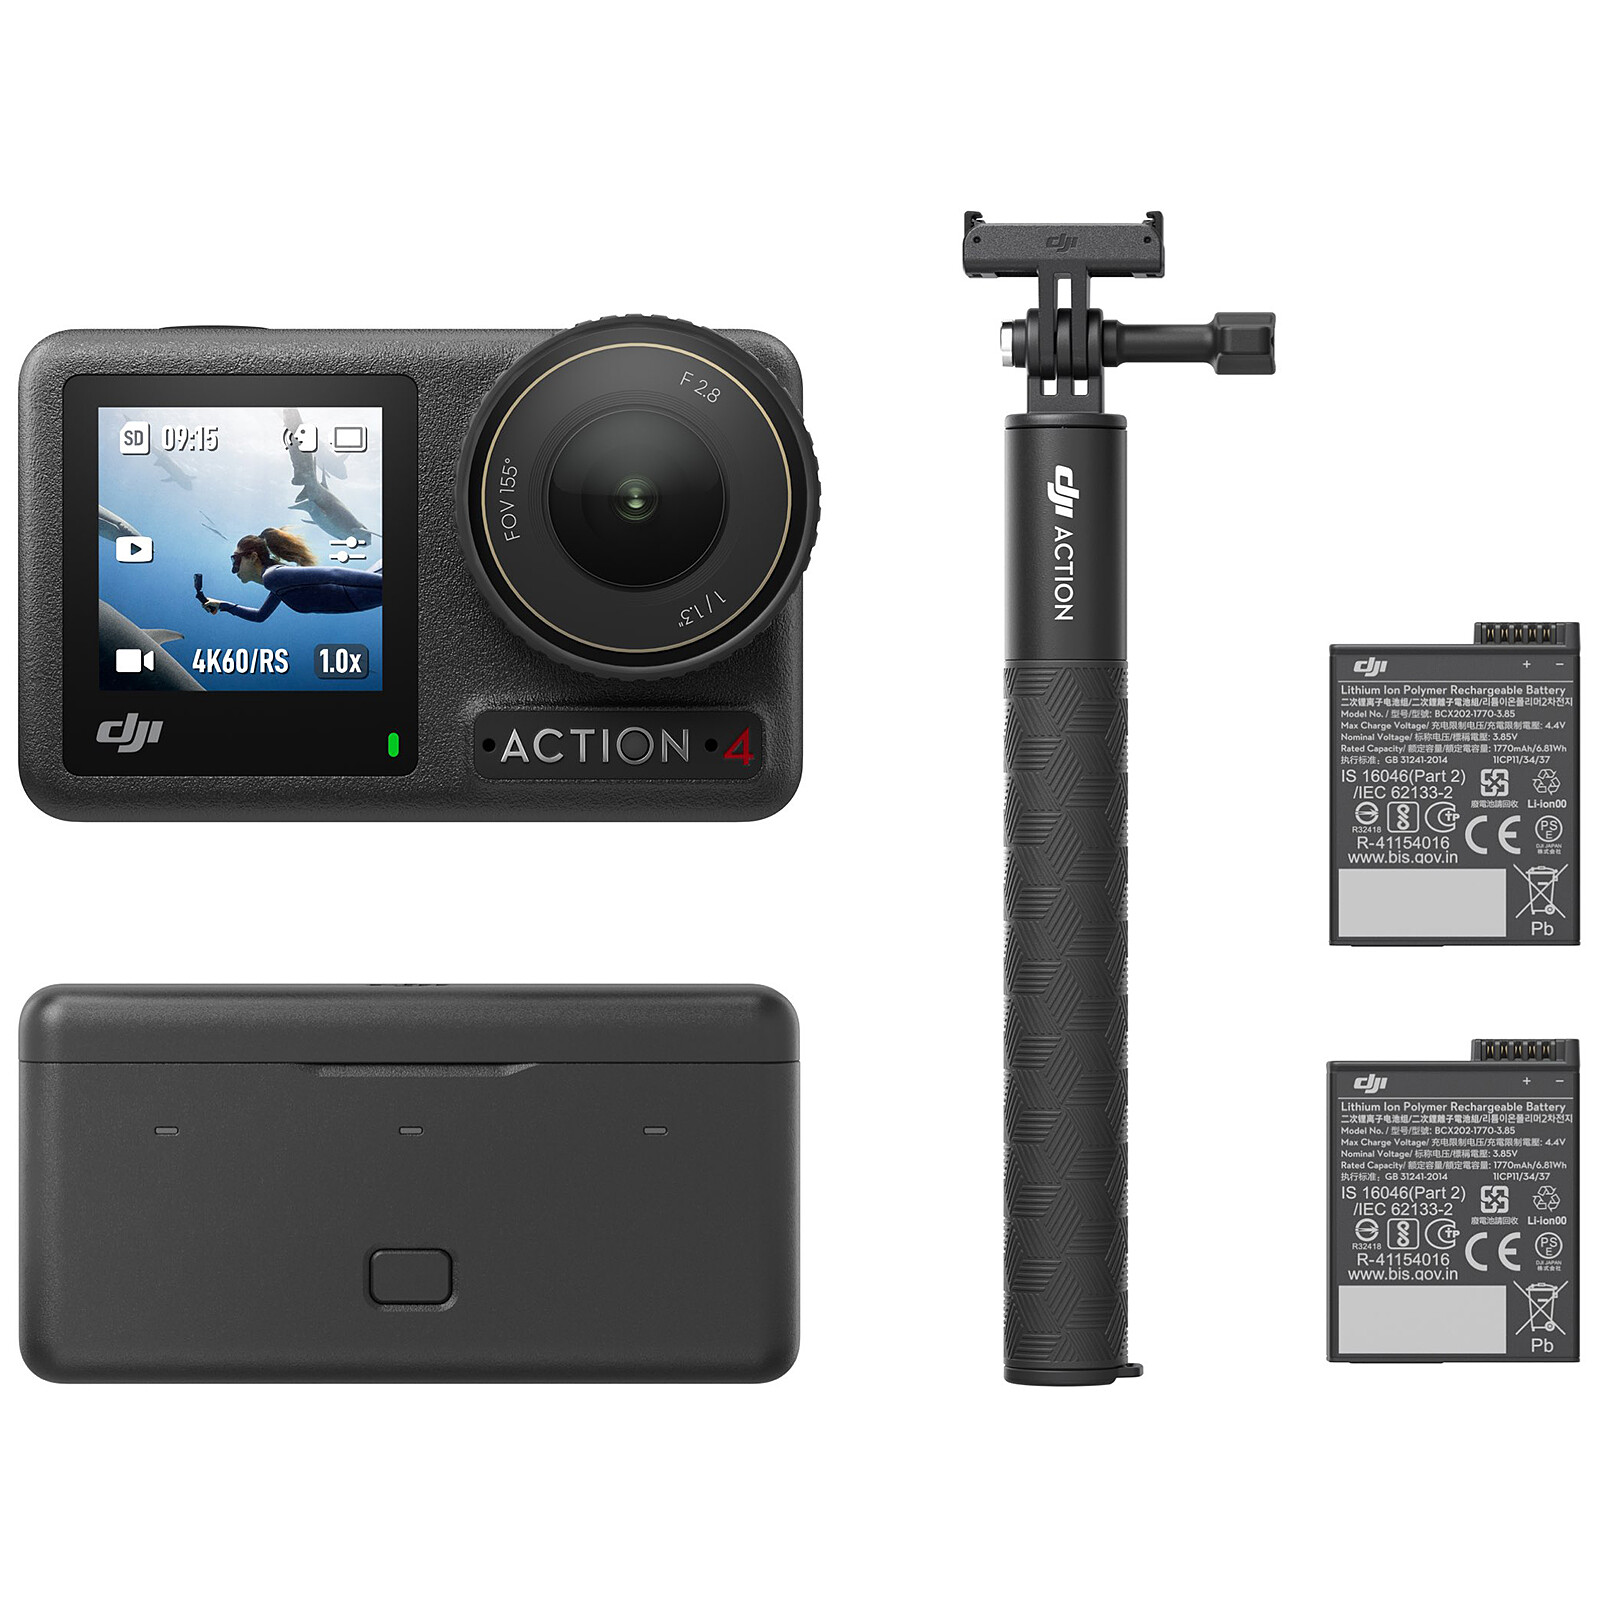 The DJI Osmo Action 4 Has Been Revealed With Better Low-Light